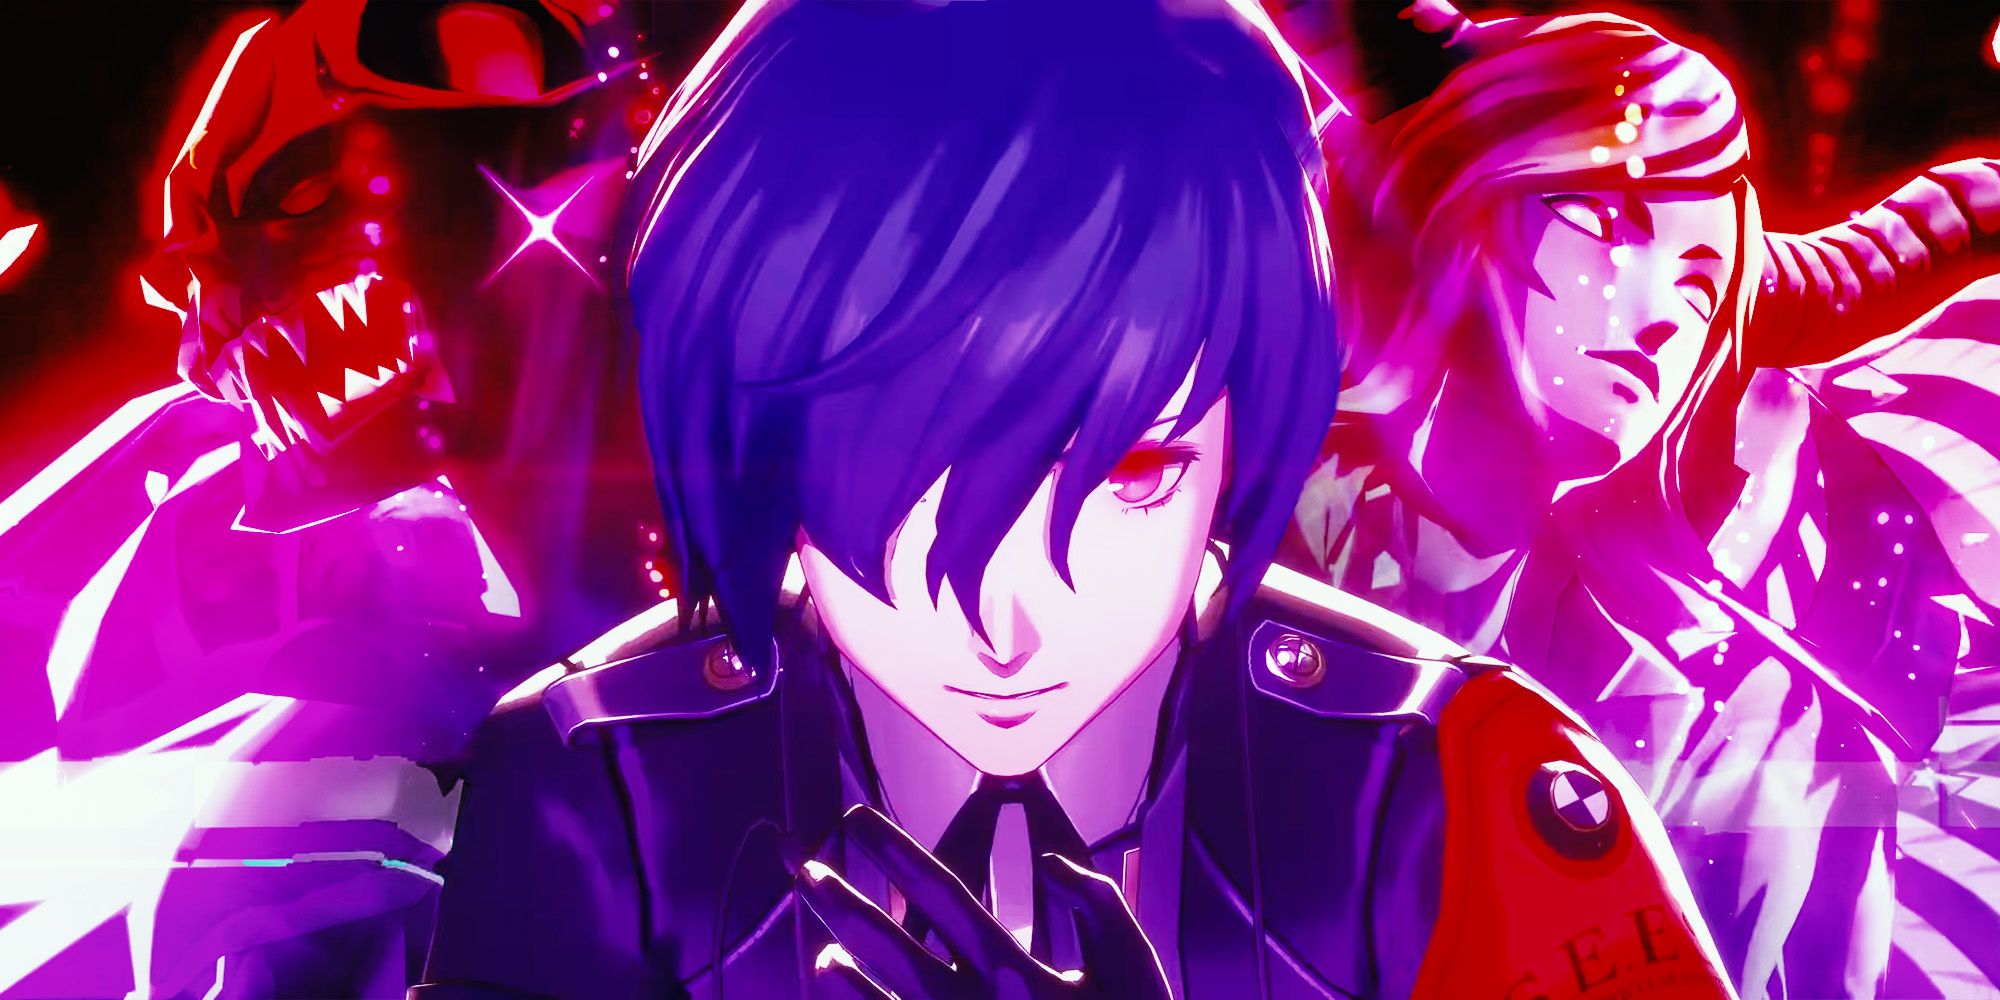 Persona 3 Reload Gets New Trailer Showcasing Gameplay & English